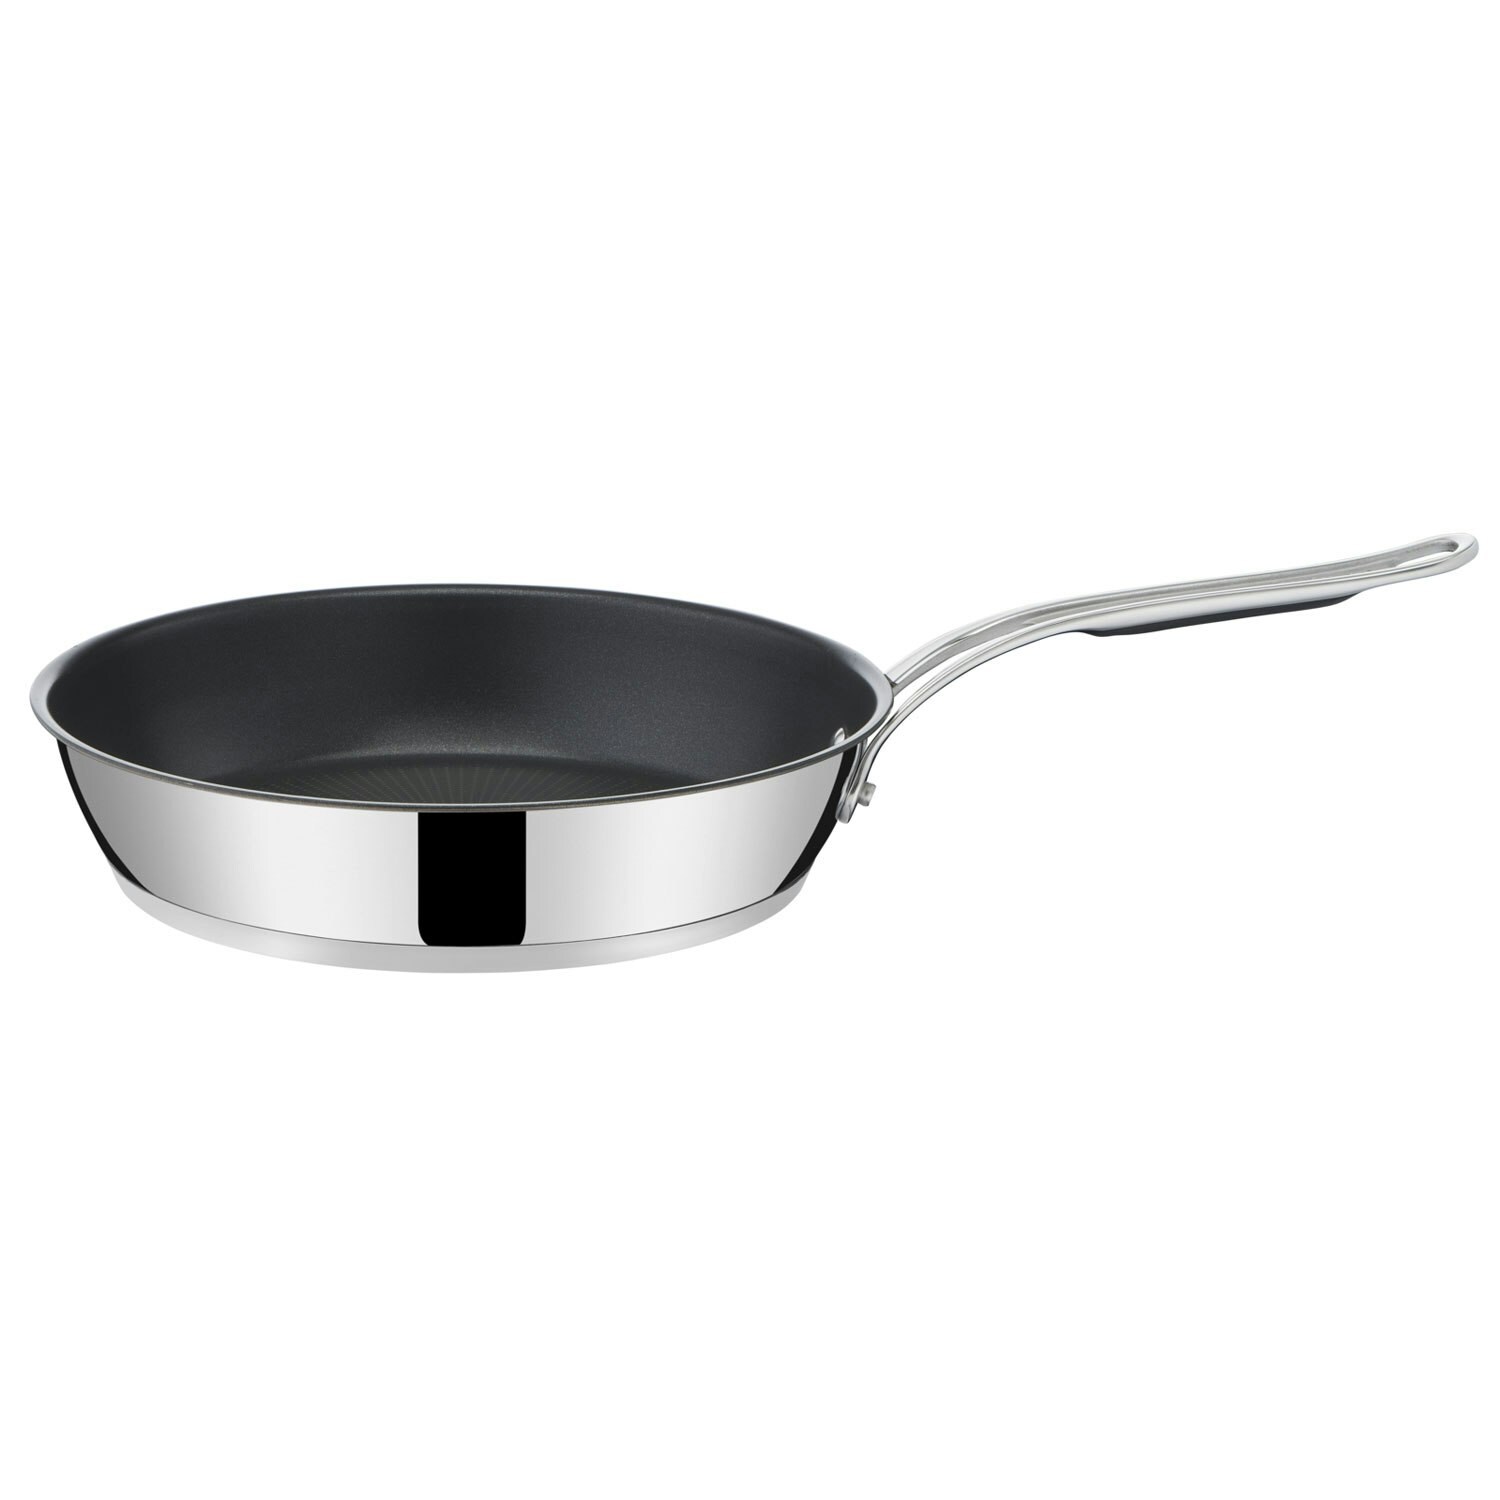 Tefal Jamie Oliver 28cm Stainless Steel Induction Wok